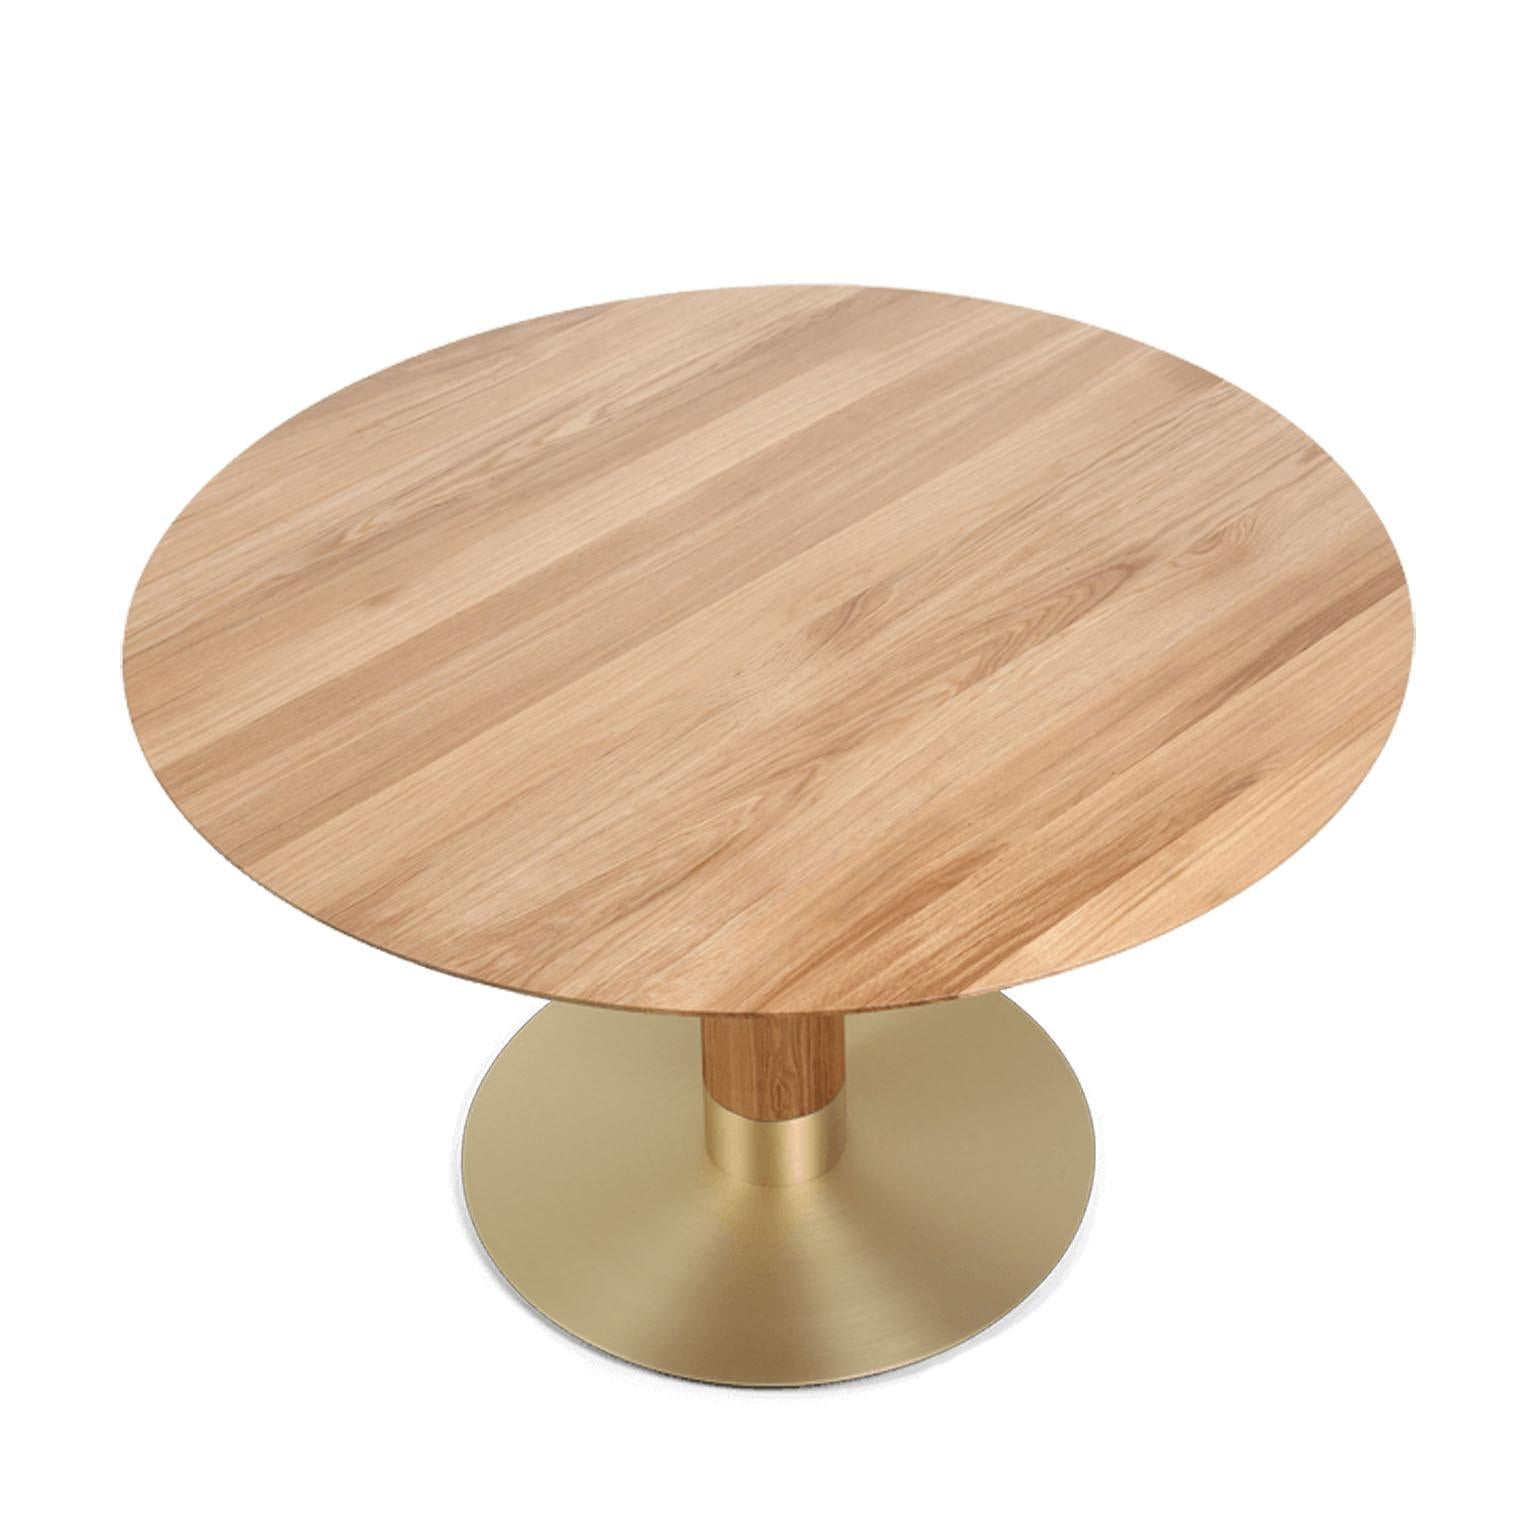 Gather your friends at your next dinner party in style with the New Luxury Round Dining Table Supero.
Sculpted by skilled craftsmen, this designer table features a solid oak rounded table top, steadied by a solid brass and oak base. Simply chic,